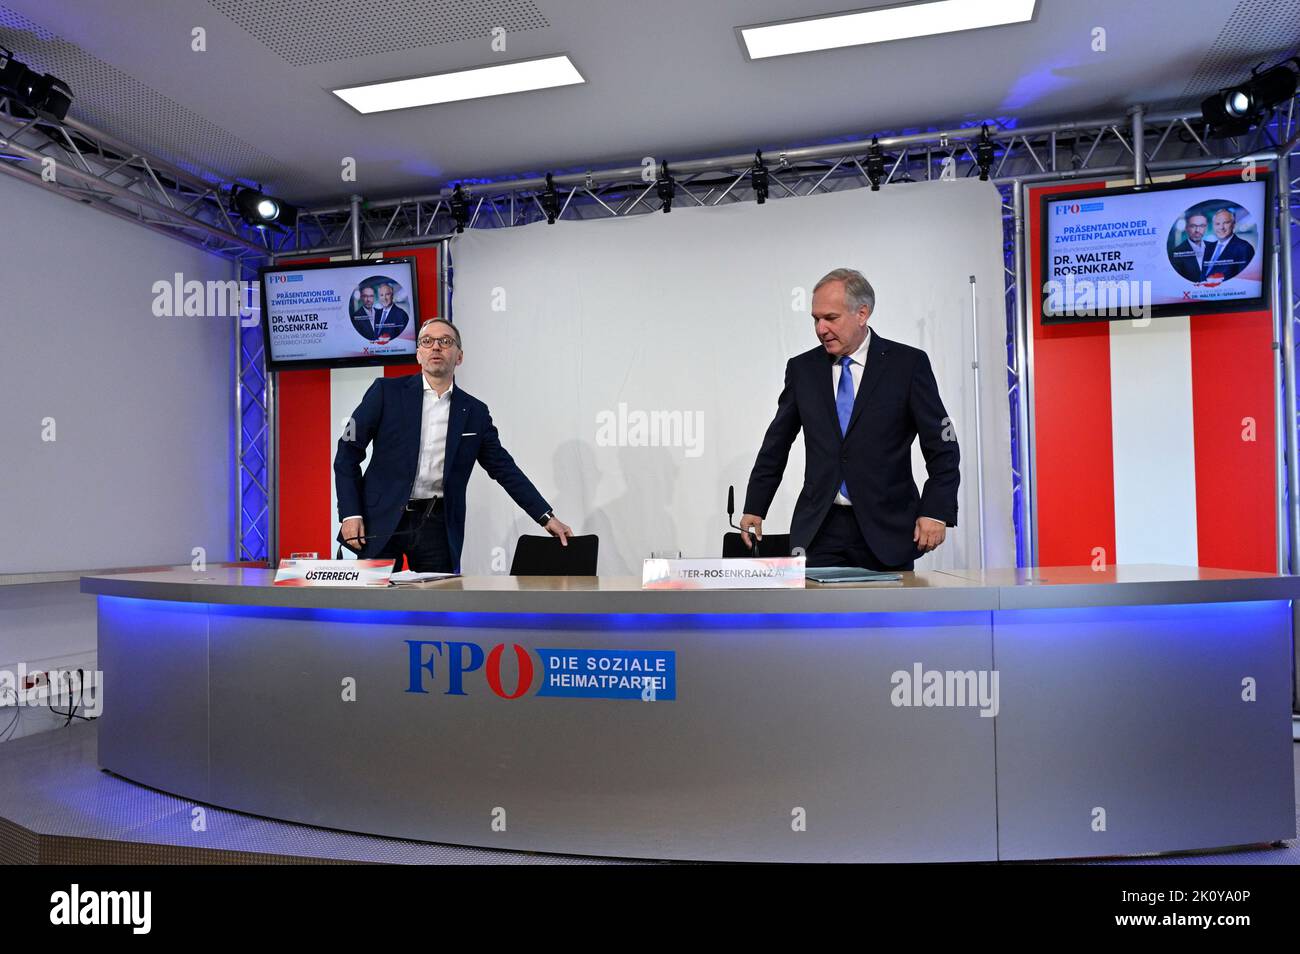 Vienna, Austria. 14th Sep, 2022. Second Poster campaign for the federal presidential election on October 9, 2022 with FPÖ Federal Party Chairman Herbert Kickl (L)  and the FPÖ candidate Walter Rosenkranz (R). Credit: Alamy Live News Stock Photo